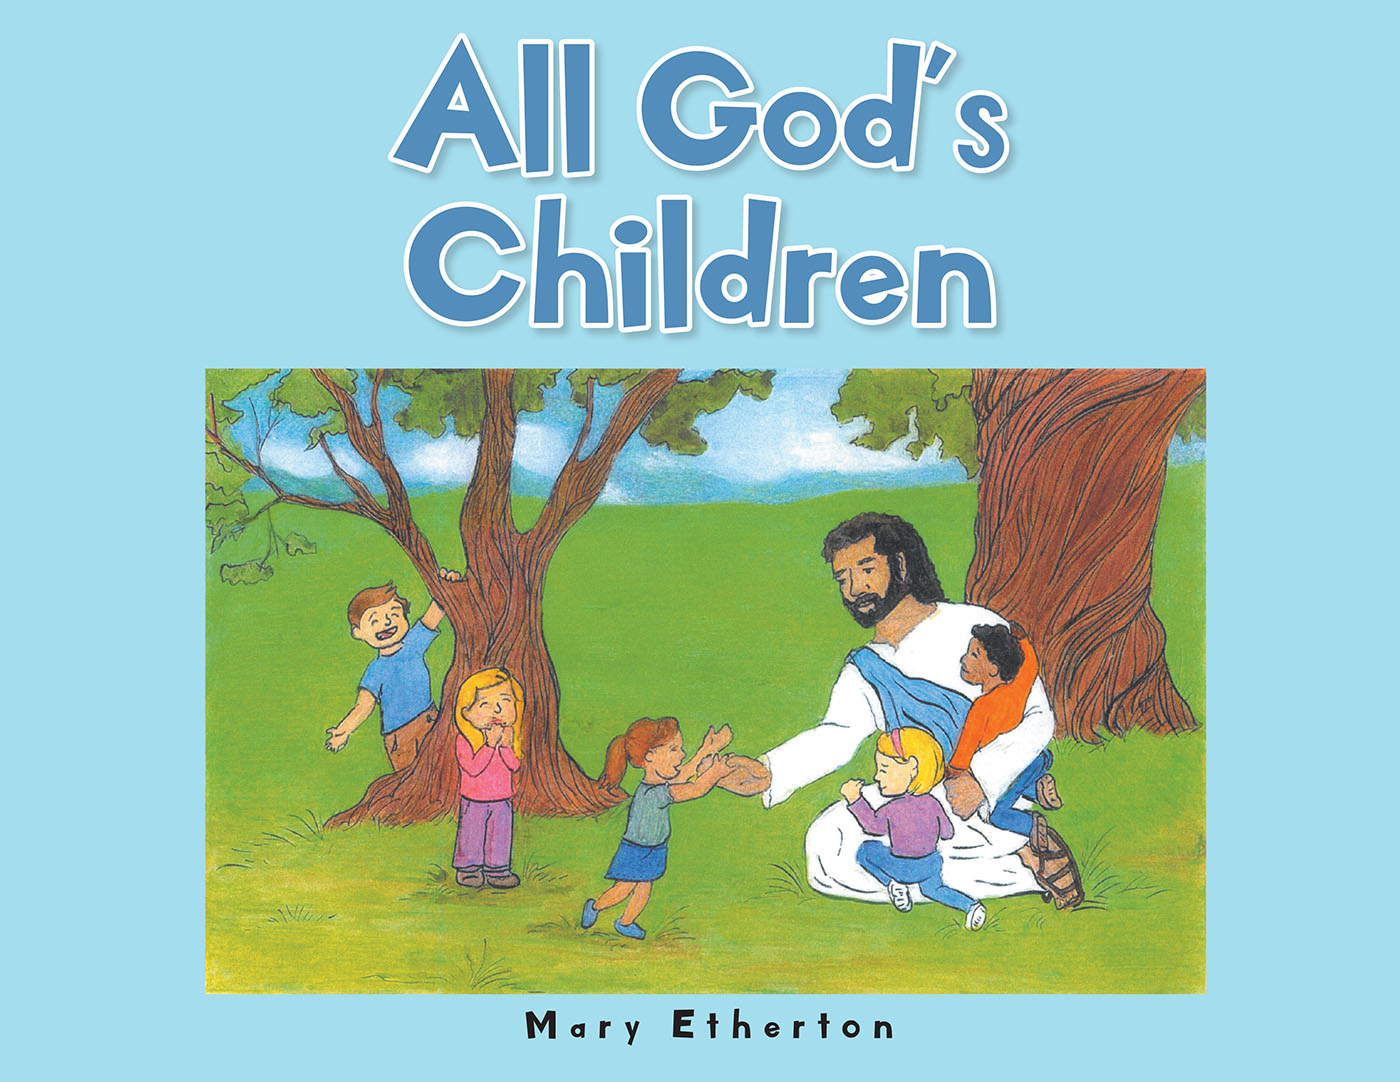 Mary Etherton’s Newly Released, "All God’s Children," is an Enjoyable Adventure for Young Readers Beginning to Learn About Morals and Manners